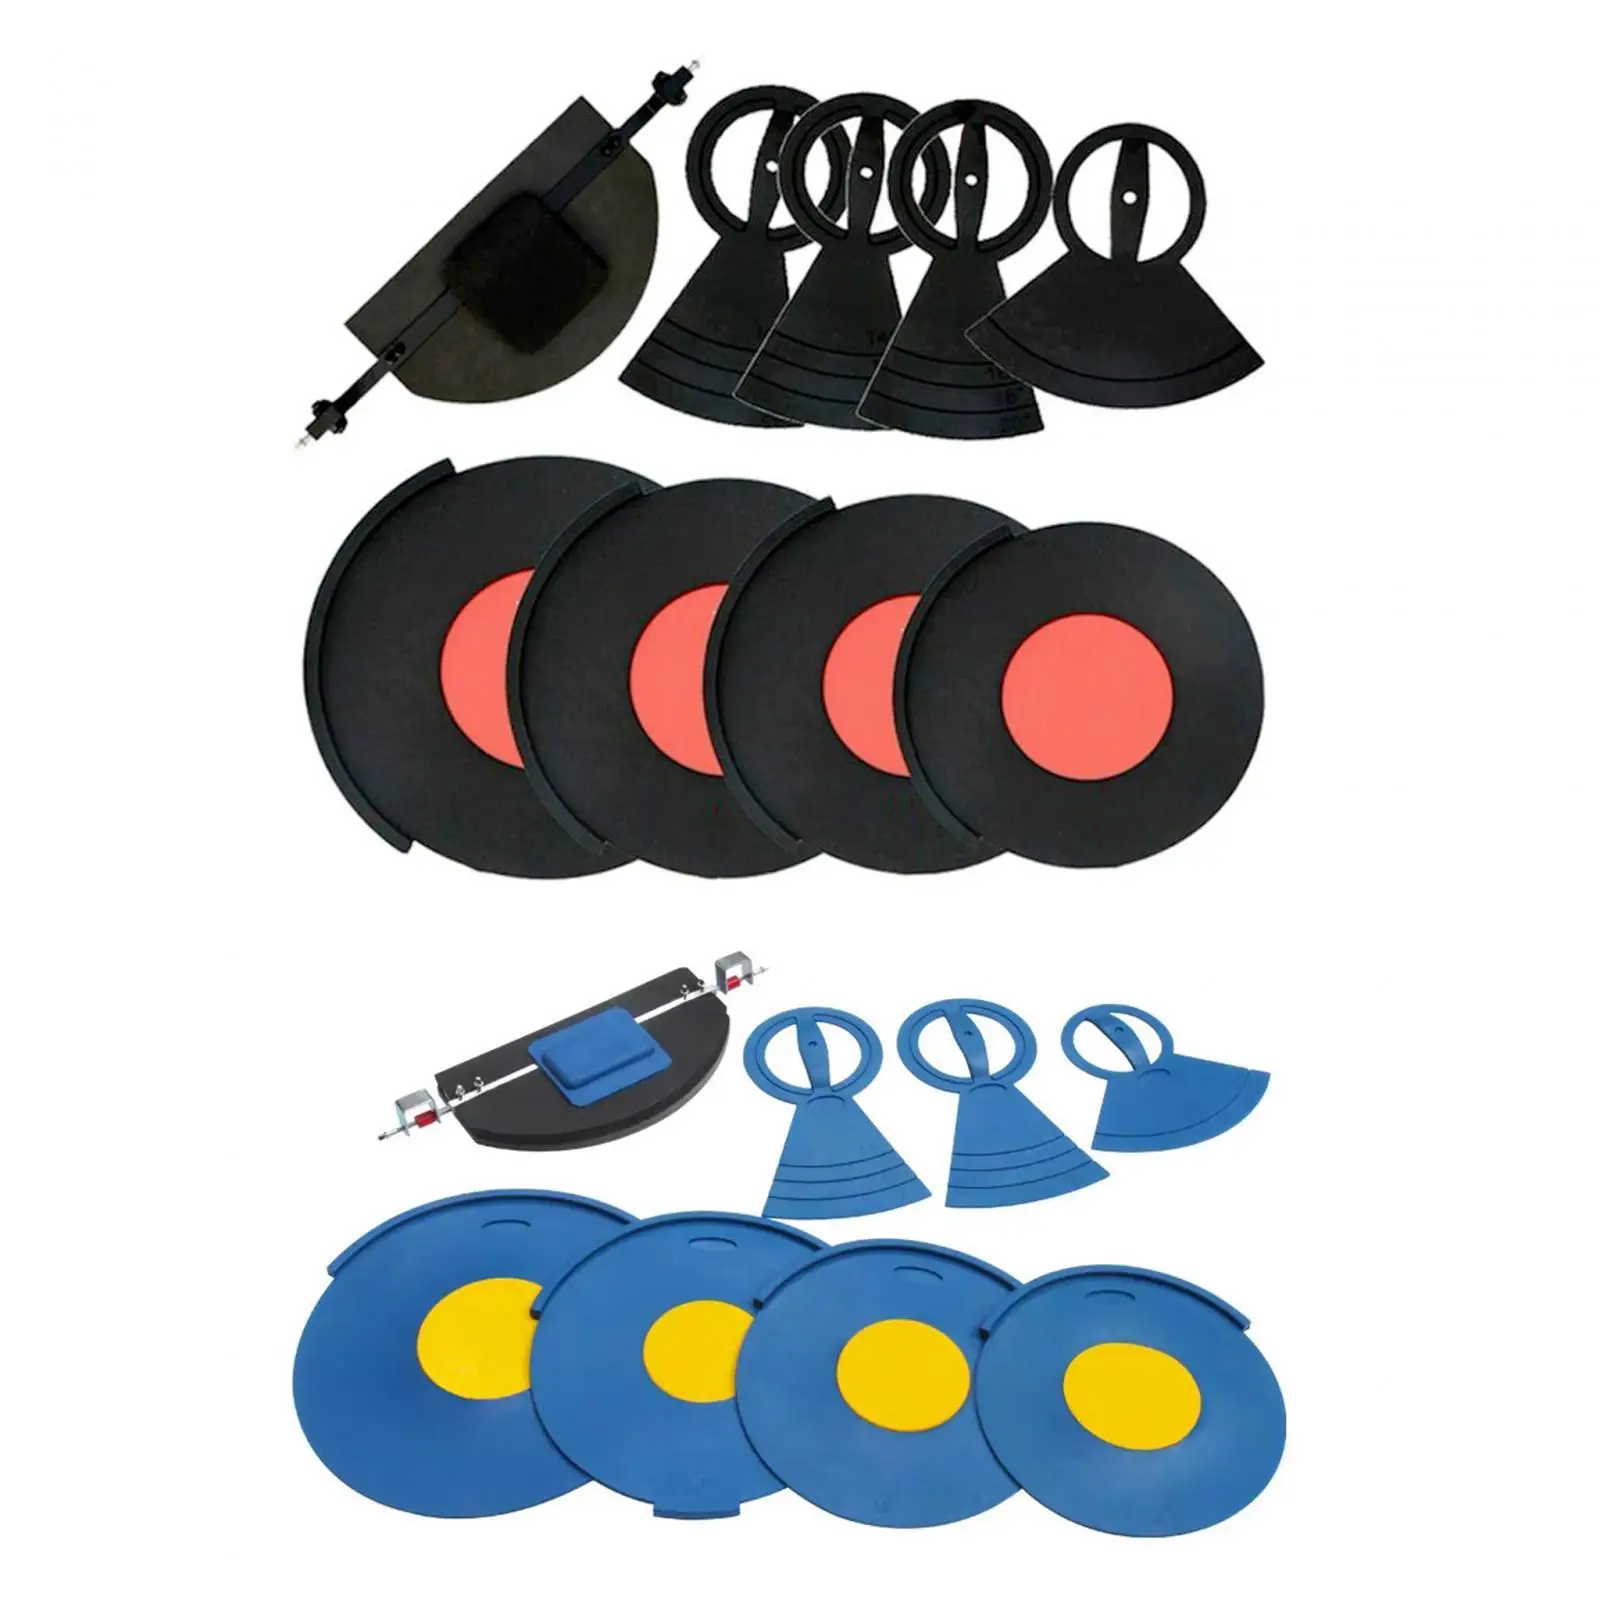 7 Pieces Drum Mute Pads Set and Cymbal Mutes Practicing Pad Drum Sound Mutes